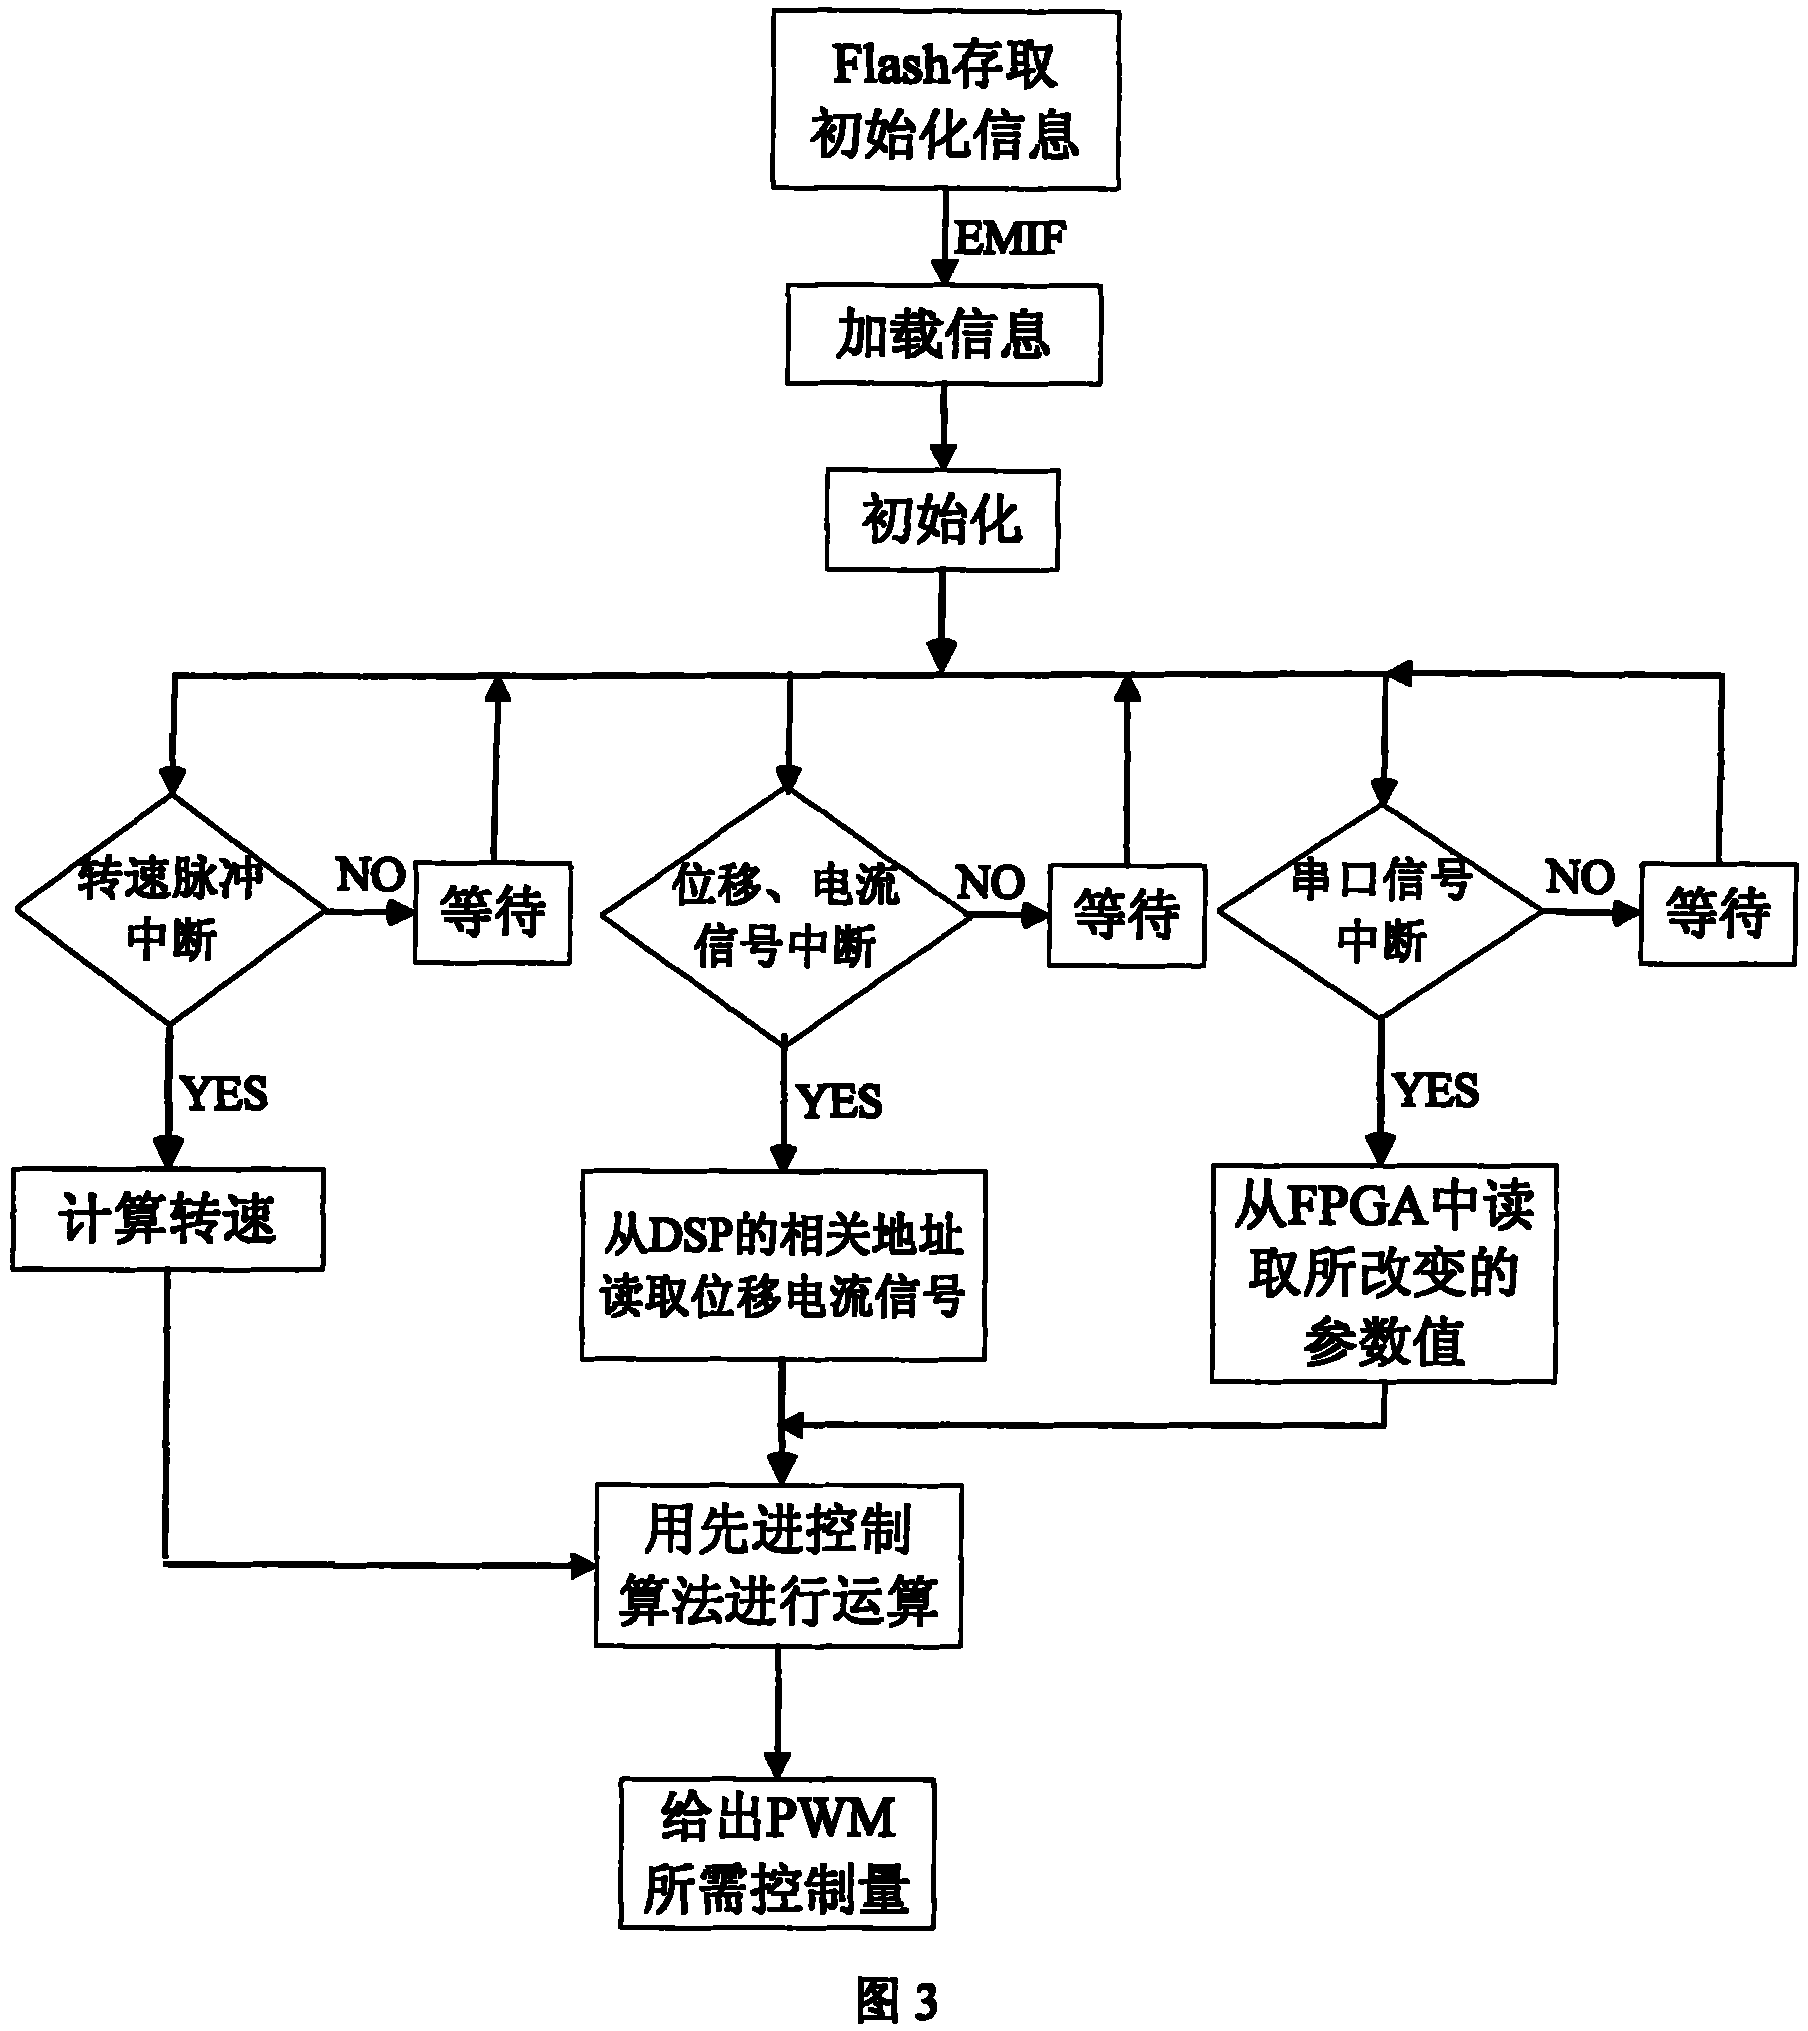 Integrated digital control system for high temperature superconducting magnetic suspension energy accumulation flywheel magnetic bearing